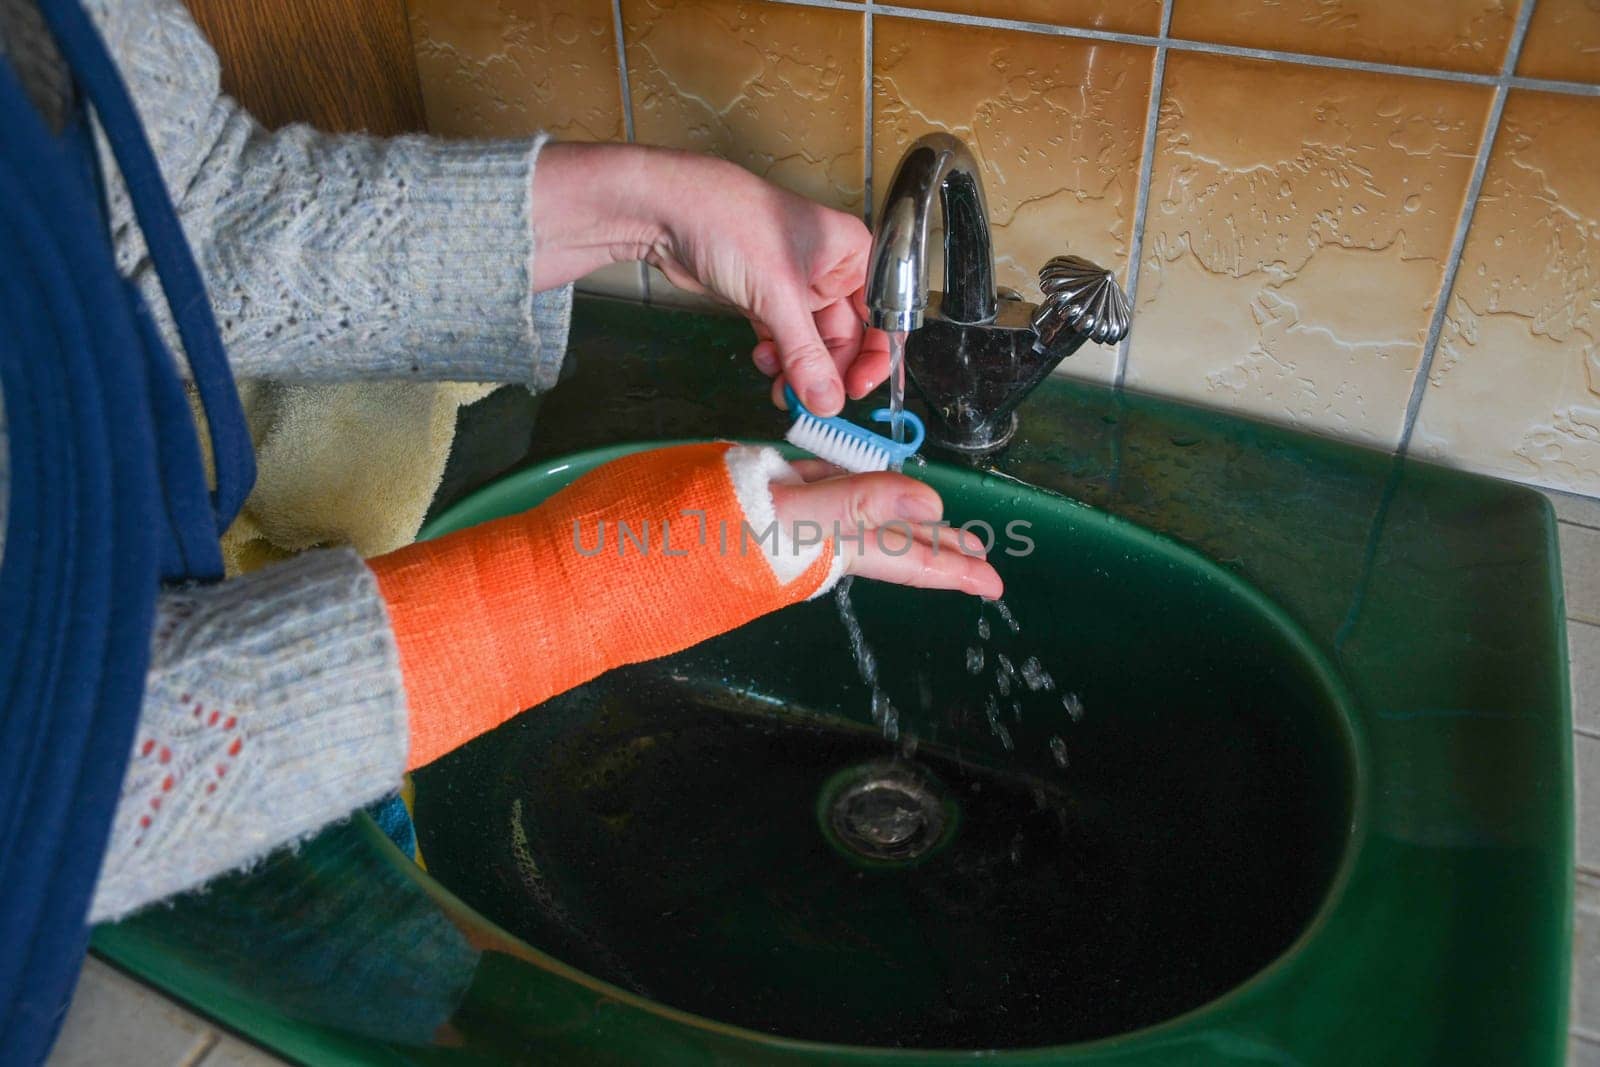 woman with a broken right arm in a cast washes her fingers free of a bandage under running water in the sink by KaterinaDalemans